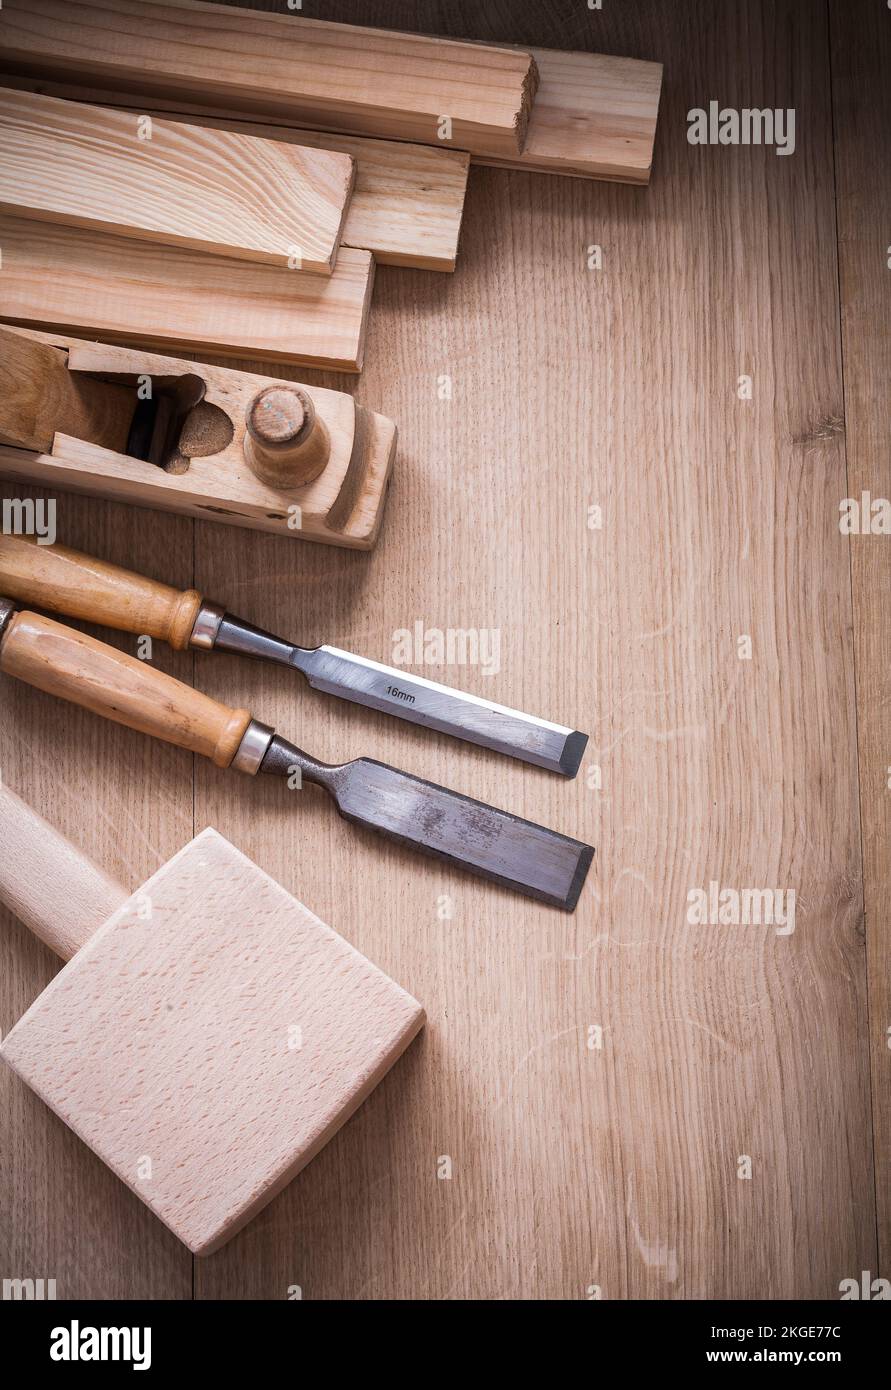 Group of wooden joiner’s working tools on wood board close up view construction concept. Stock Photo